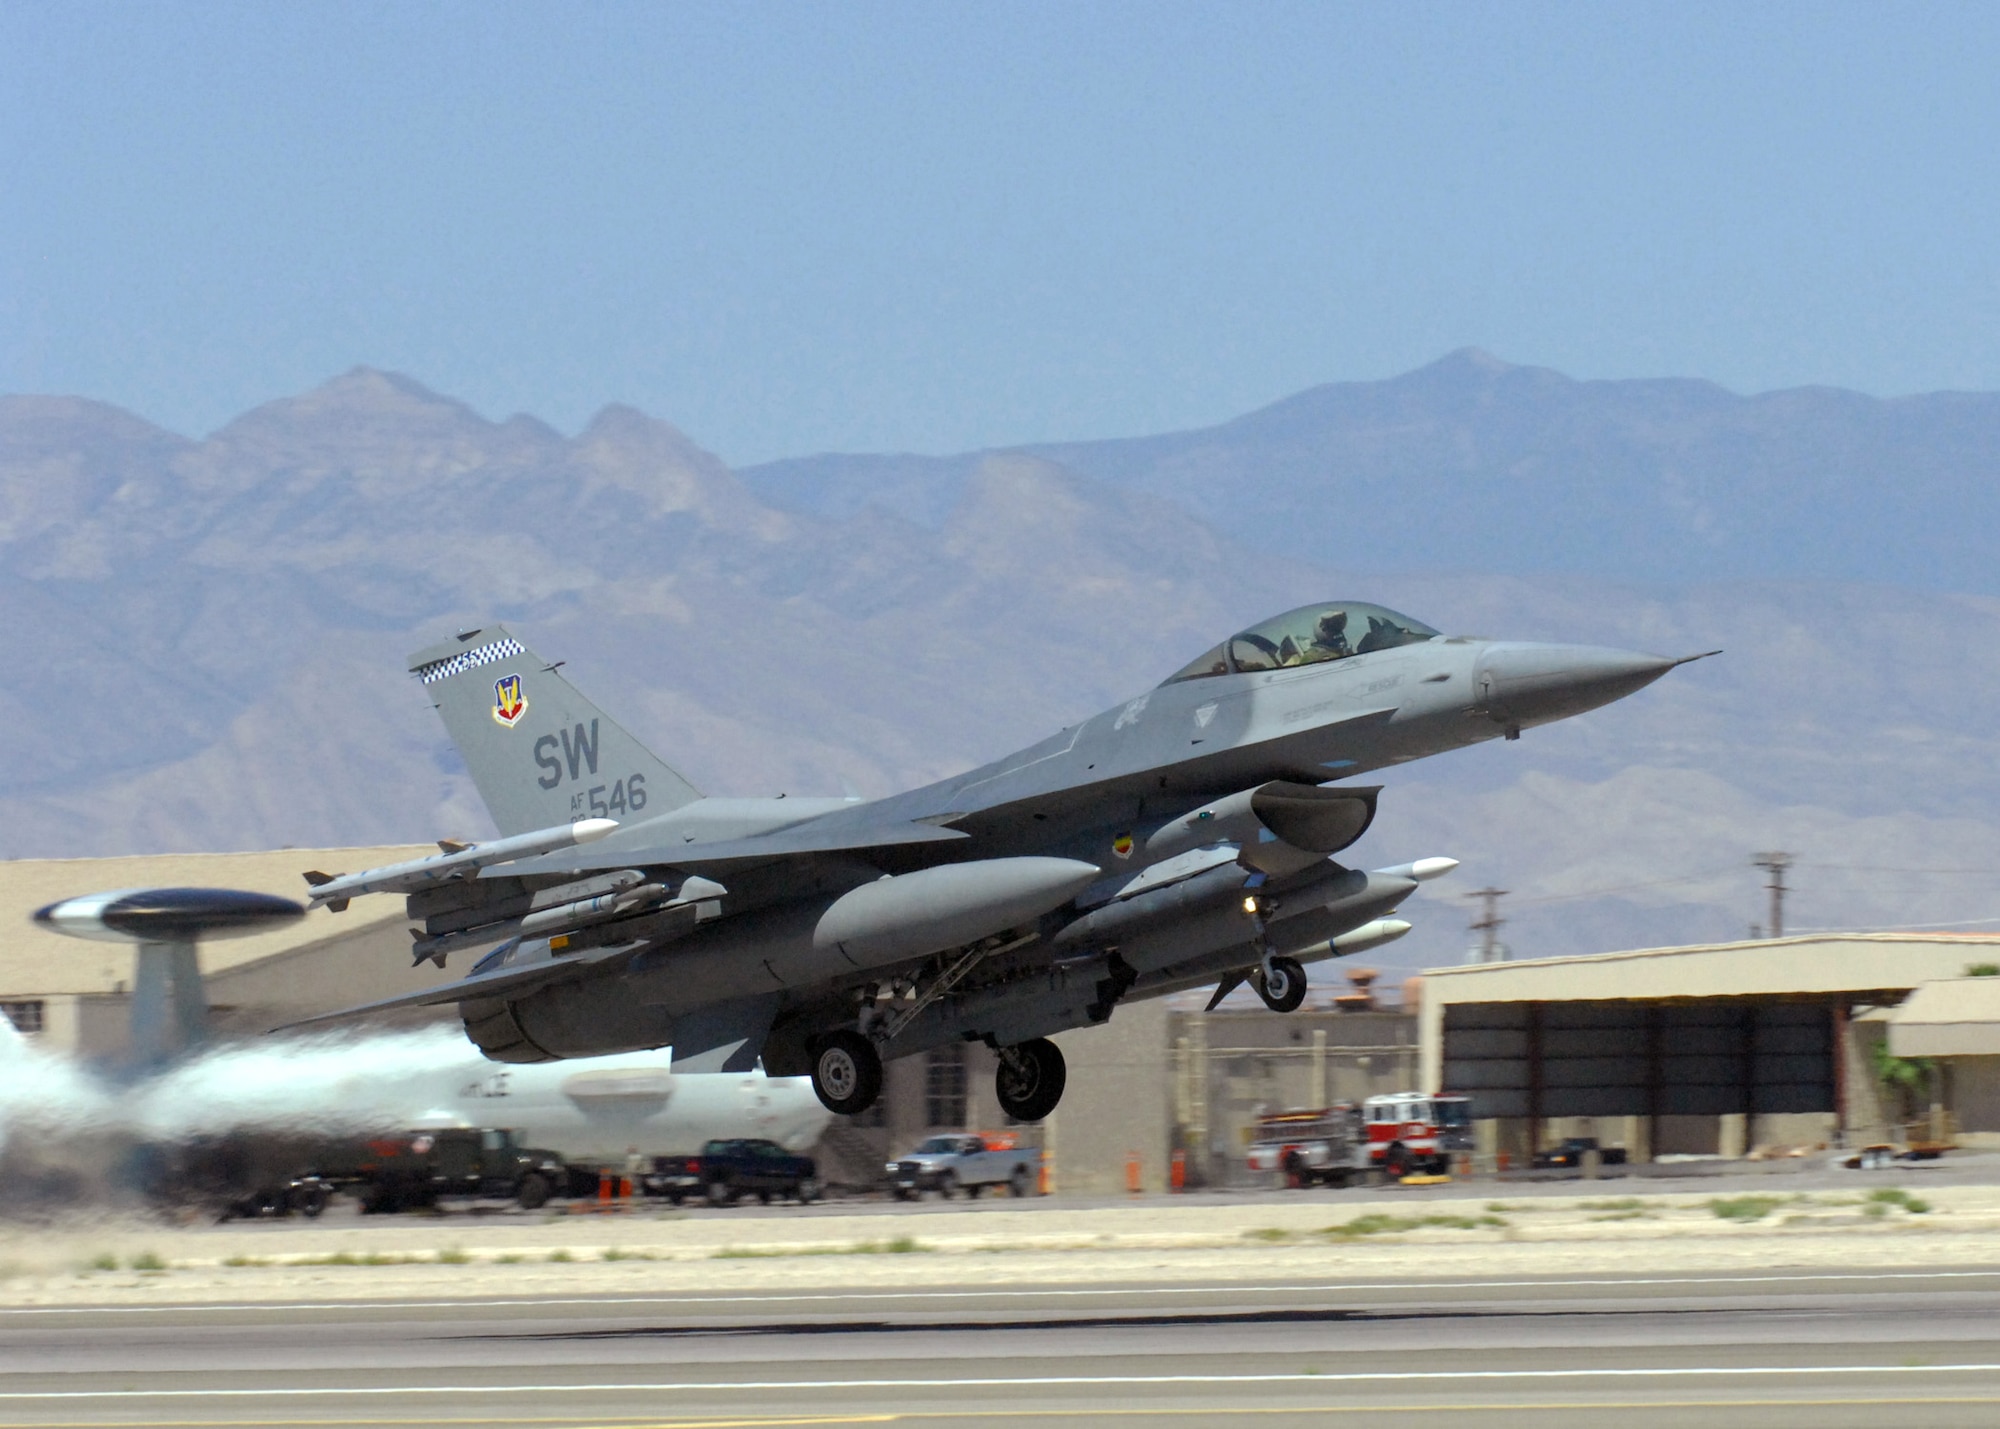 An F-16 Fighting Falcon from the 77th Fighter Squadron takes off from the runway for Exercise Red Flag July 21, 2010, at Nellis Air Force Base, Nev. Red Flag is a realistic combat training exercise involving the air forces of the U.S. and its allies. (U.S. Air Force photo/Airman 1st Class Daniel Phelps)